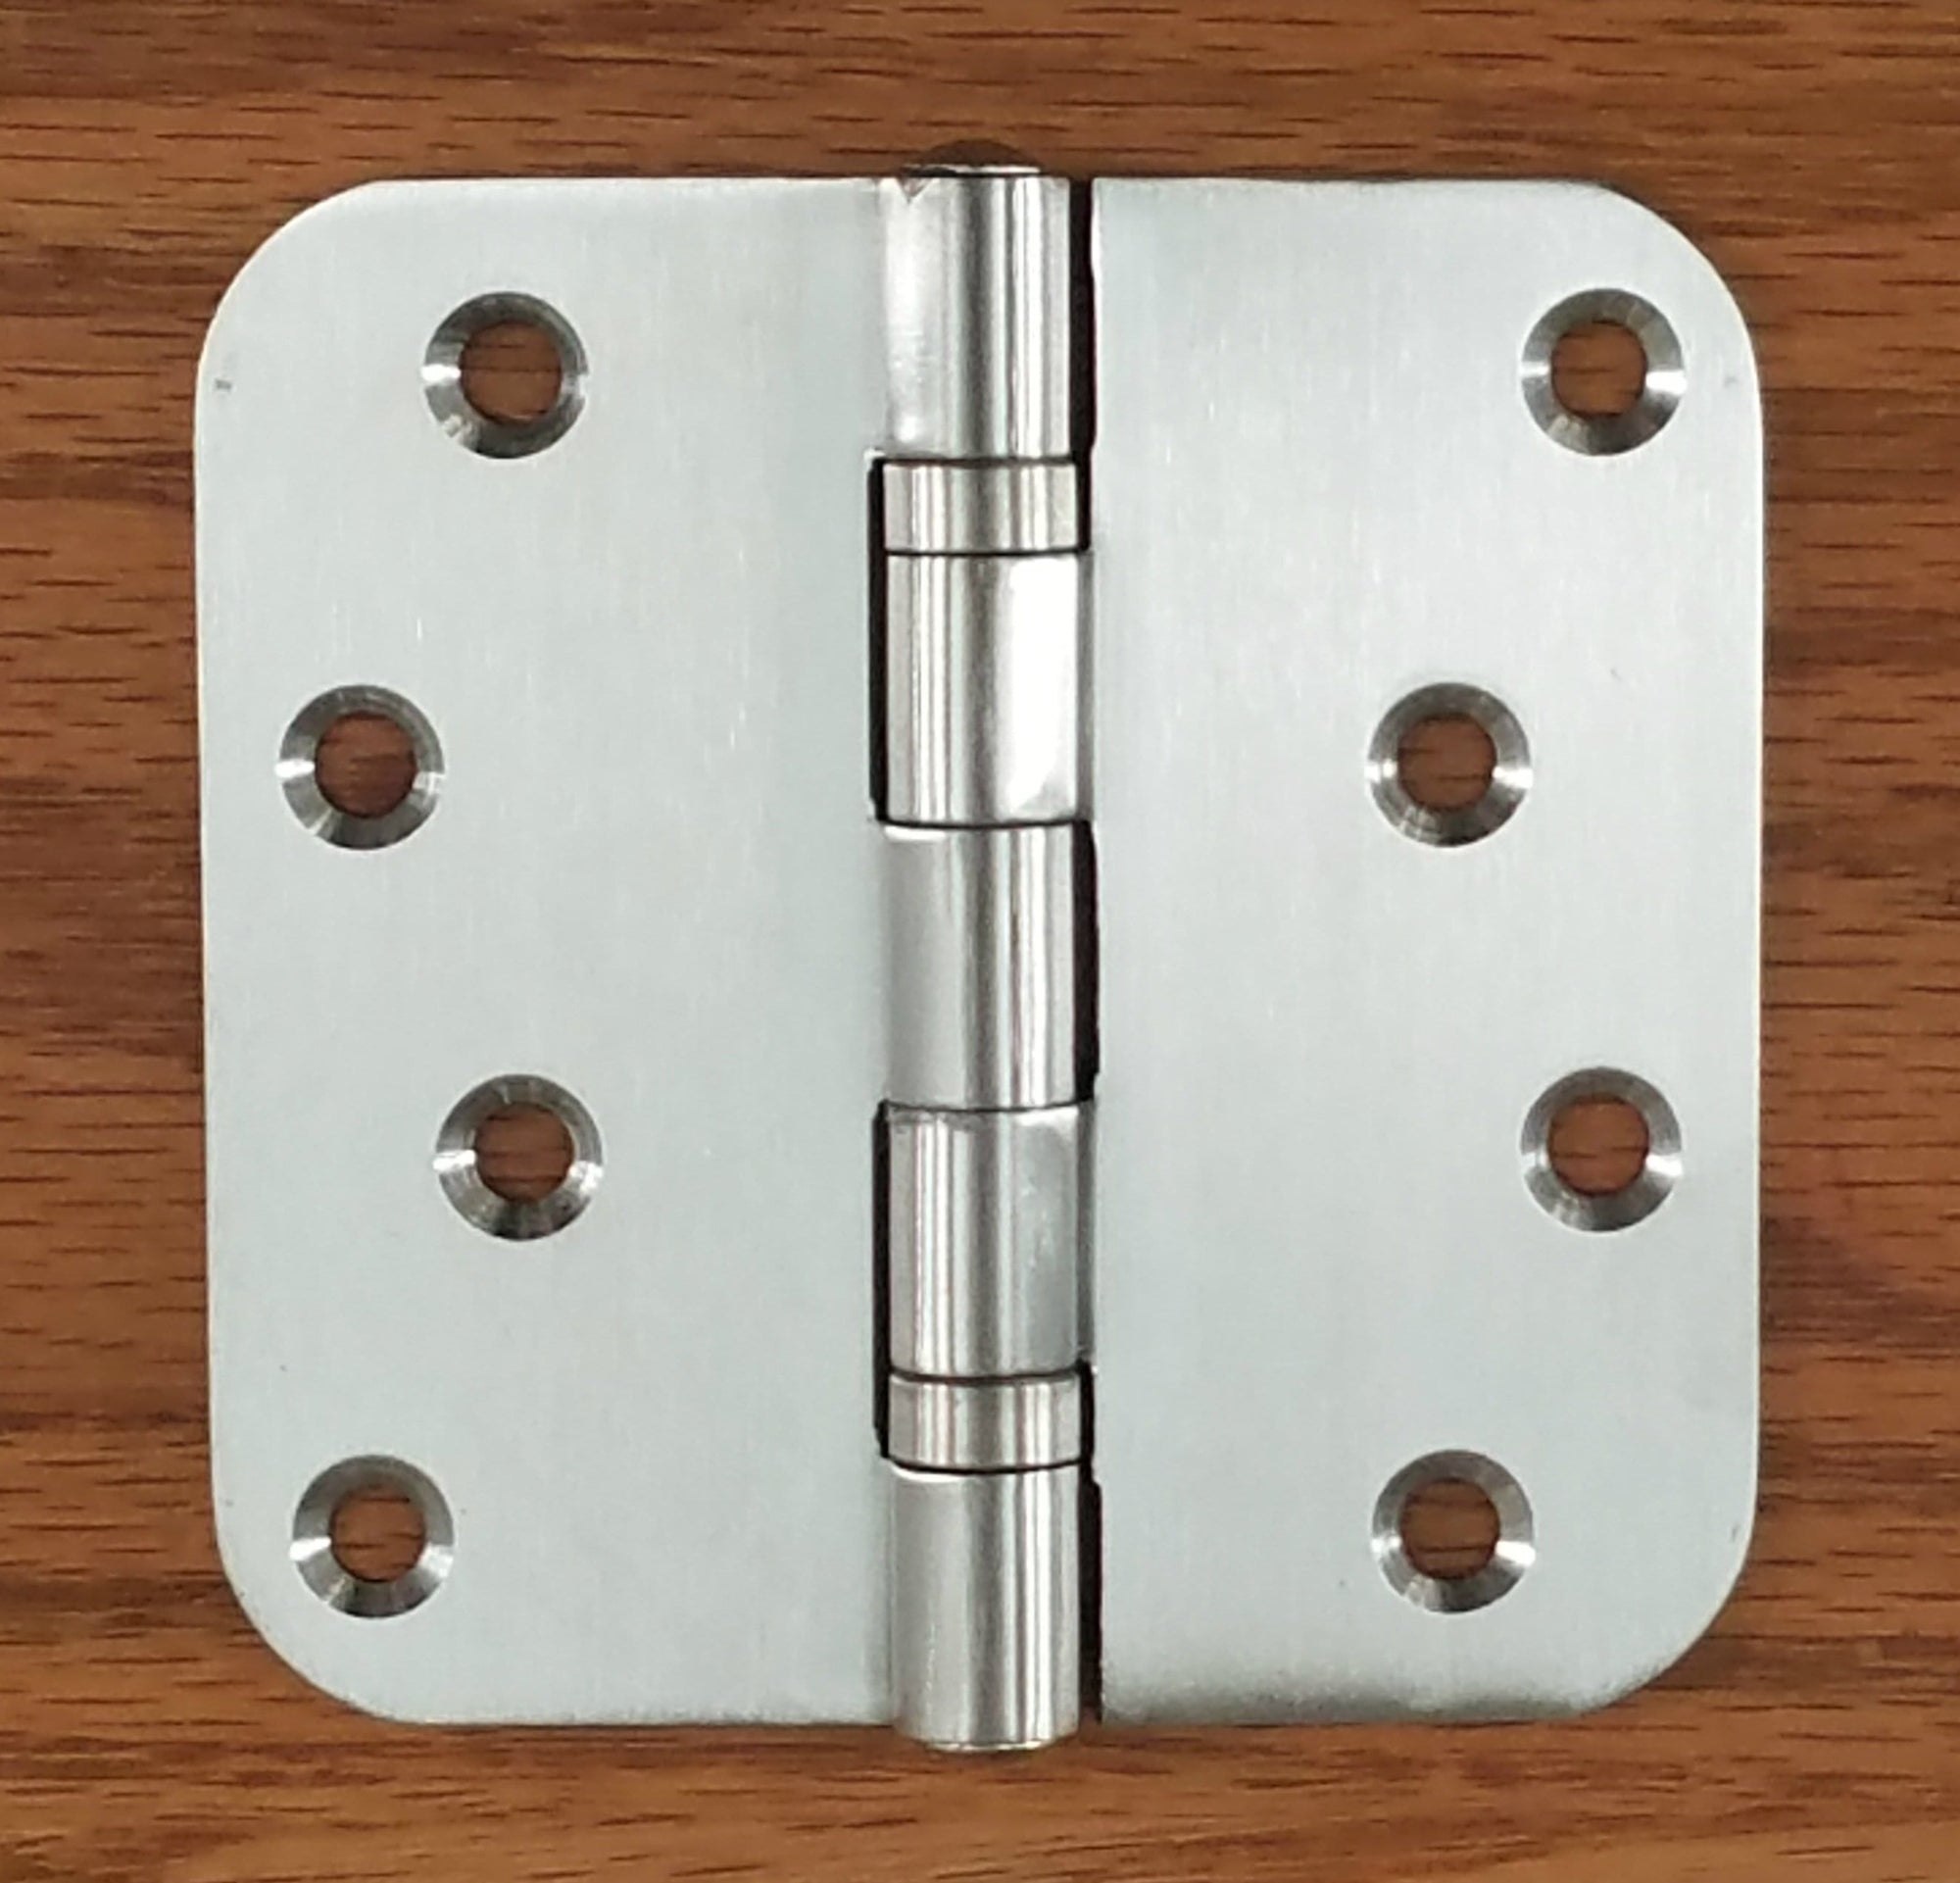 Stainless Steel Ball Bearing Security Hinges - 4" With 5/8" Radius Corners - Non-Removable Riveted Pin - 2 Pack